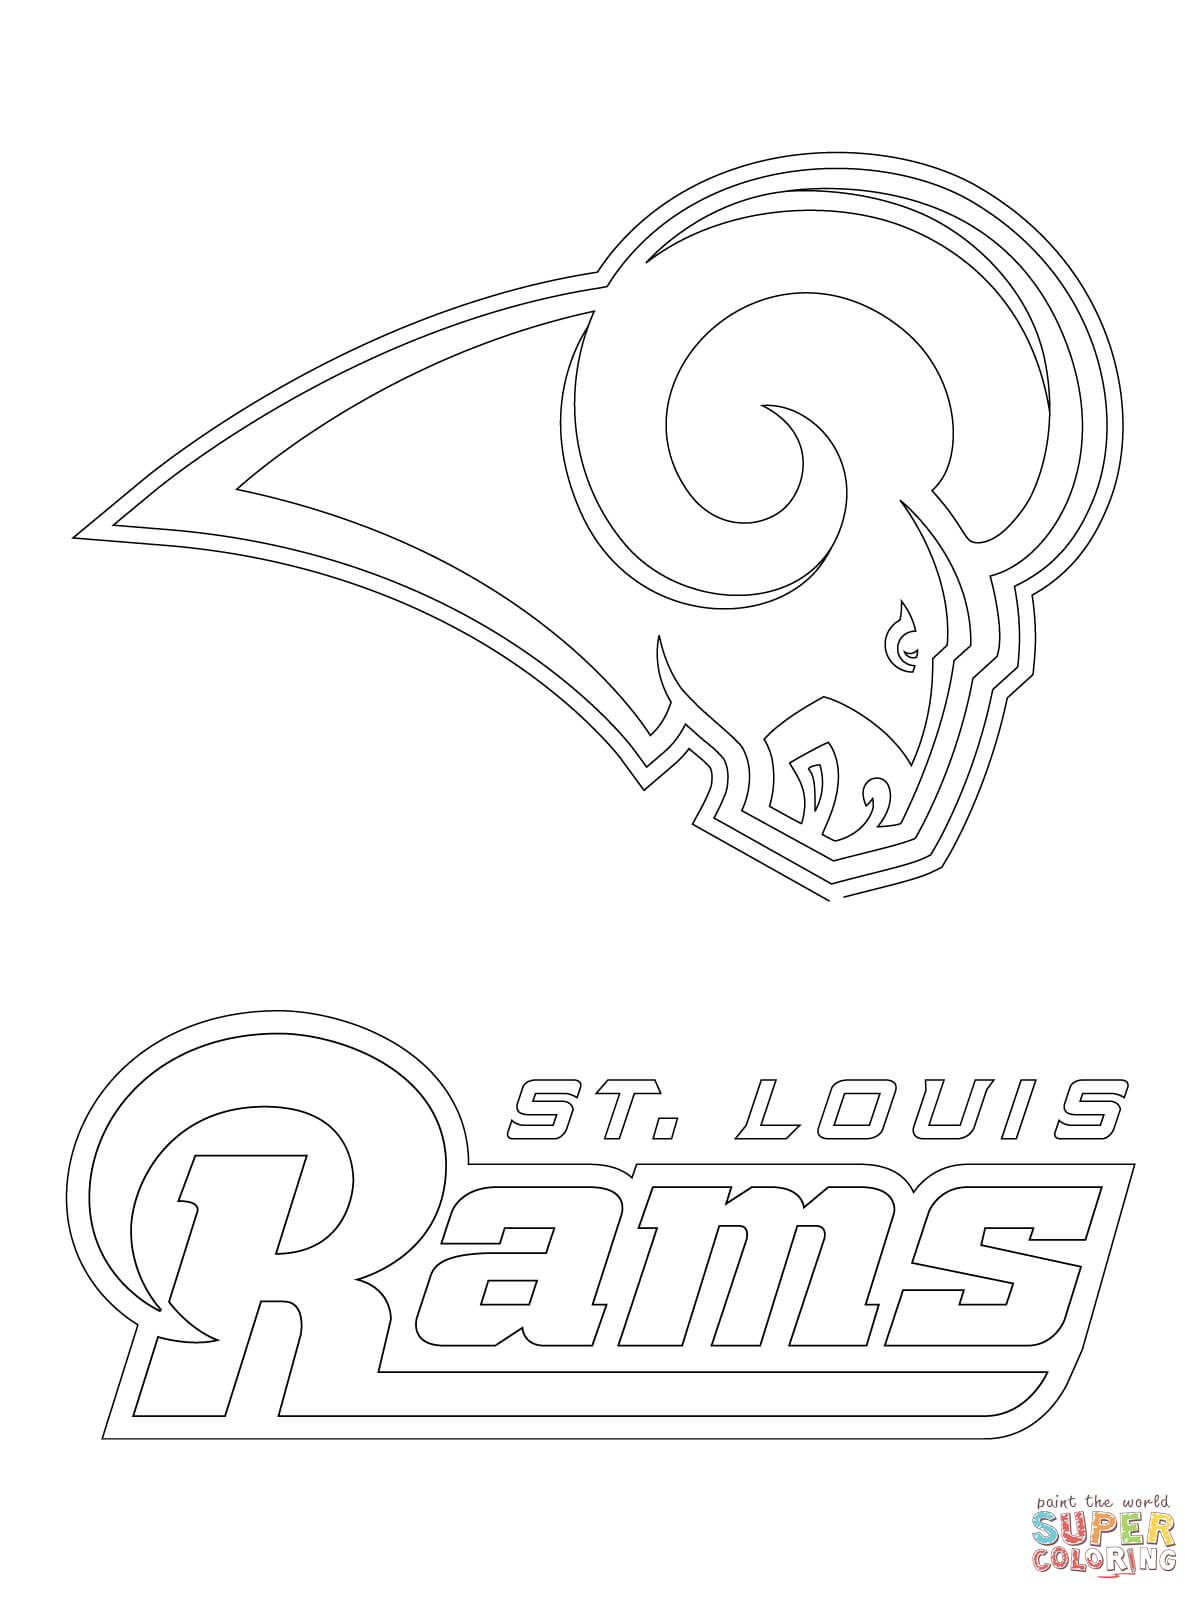 Cardinals Logo Coloring Pages at www.semadata.org | Free printable colorings pages to print and ...